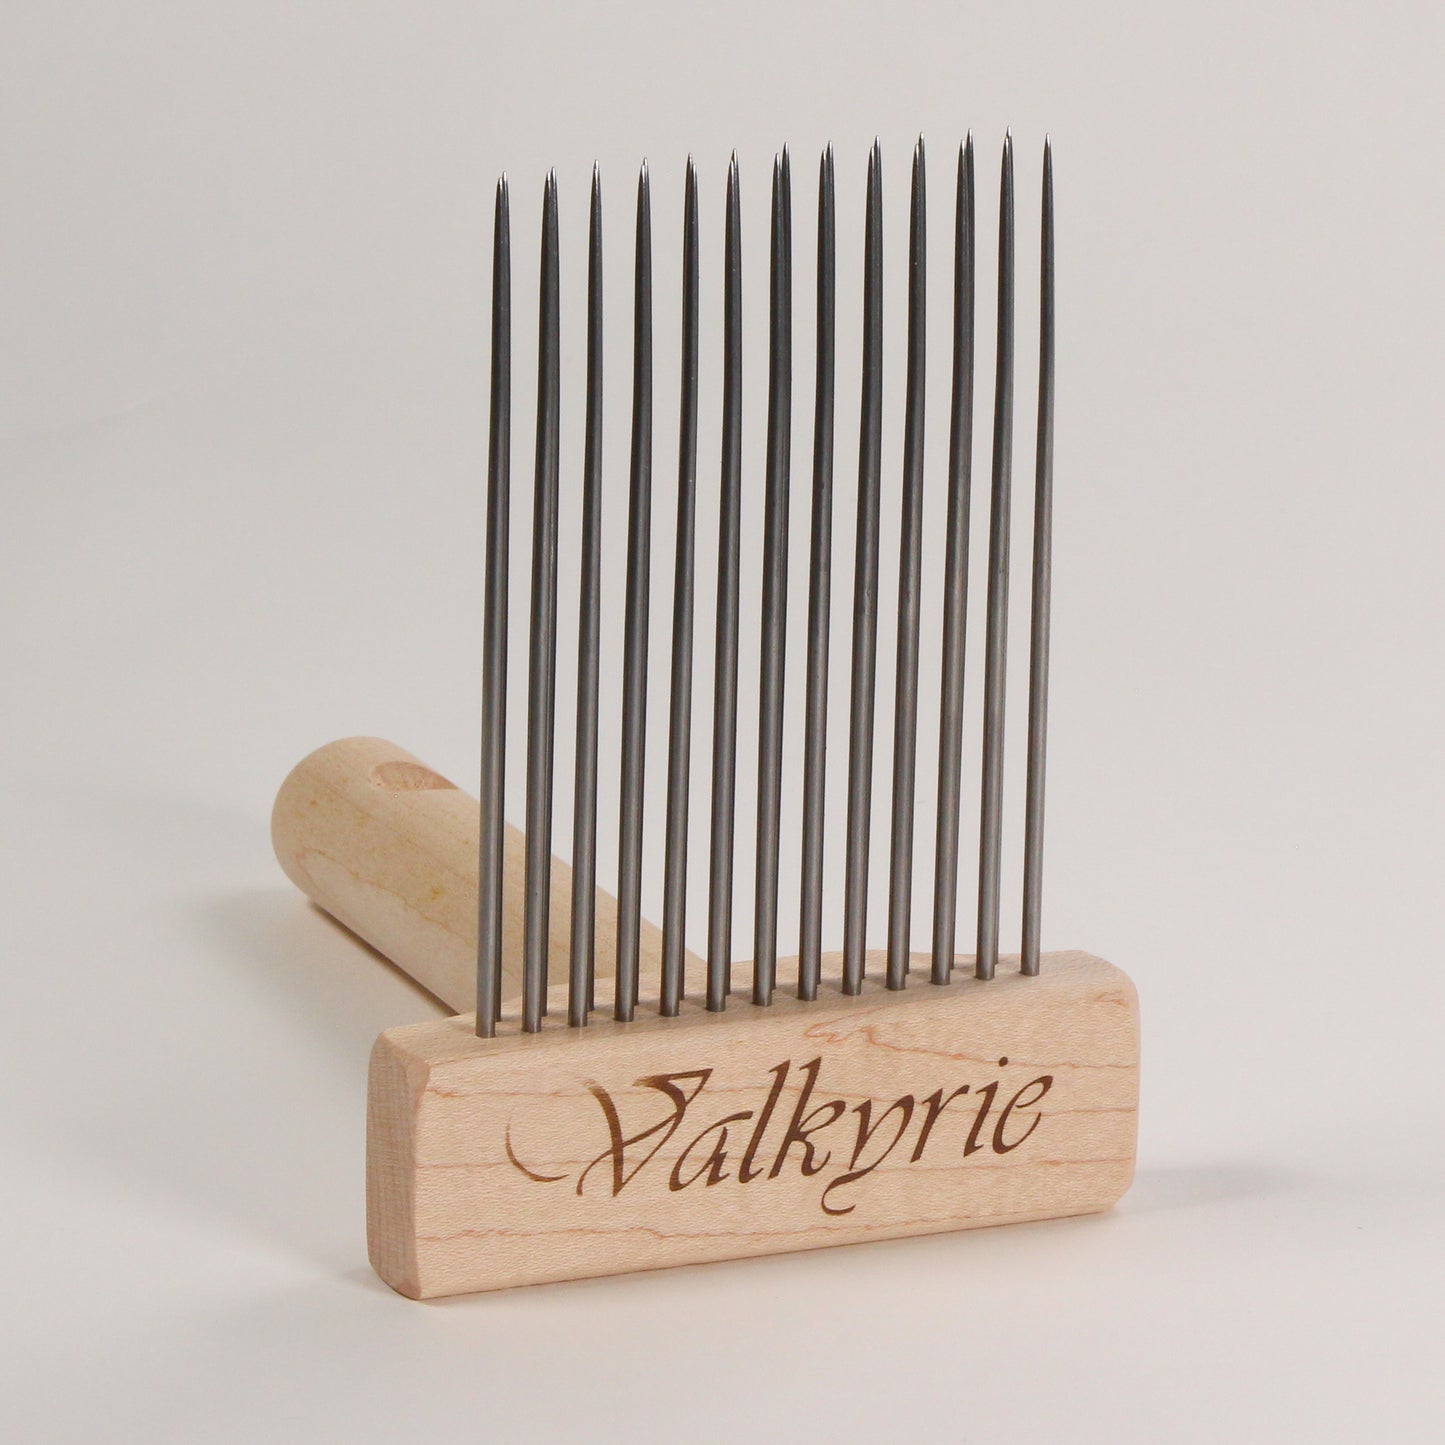 Maple Wool Combs